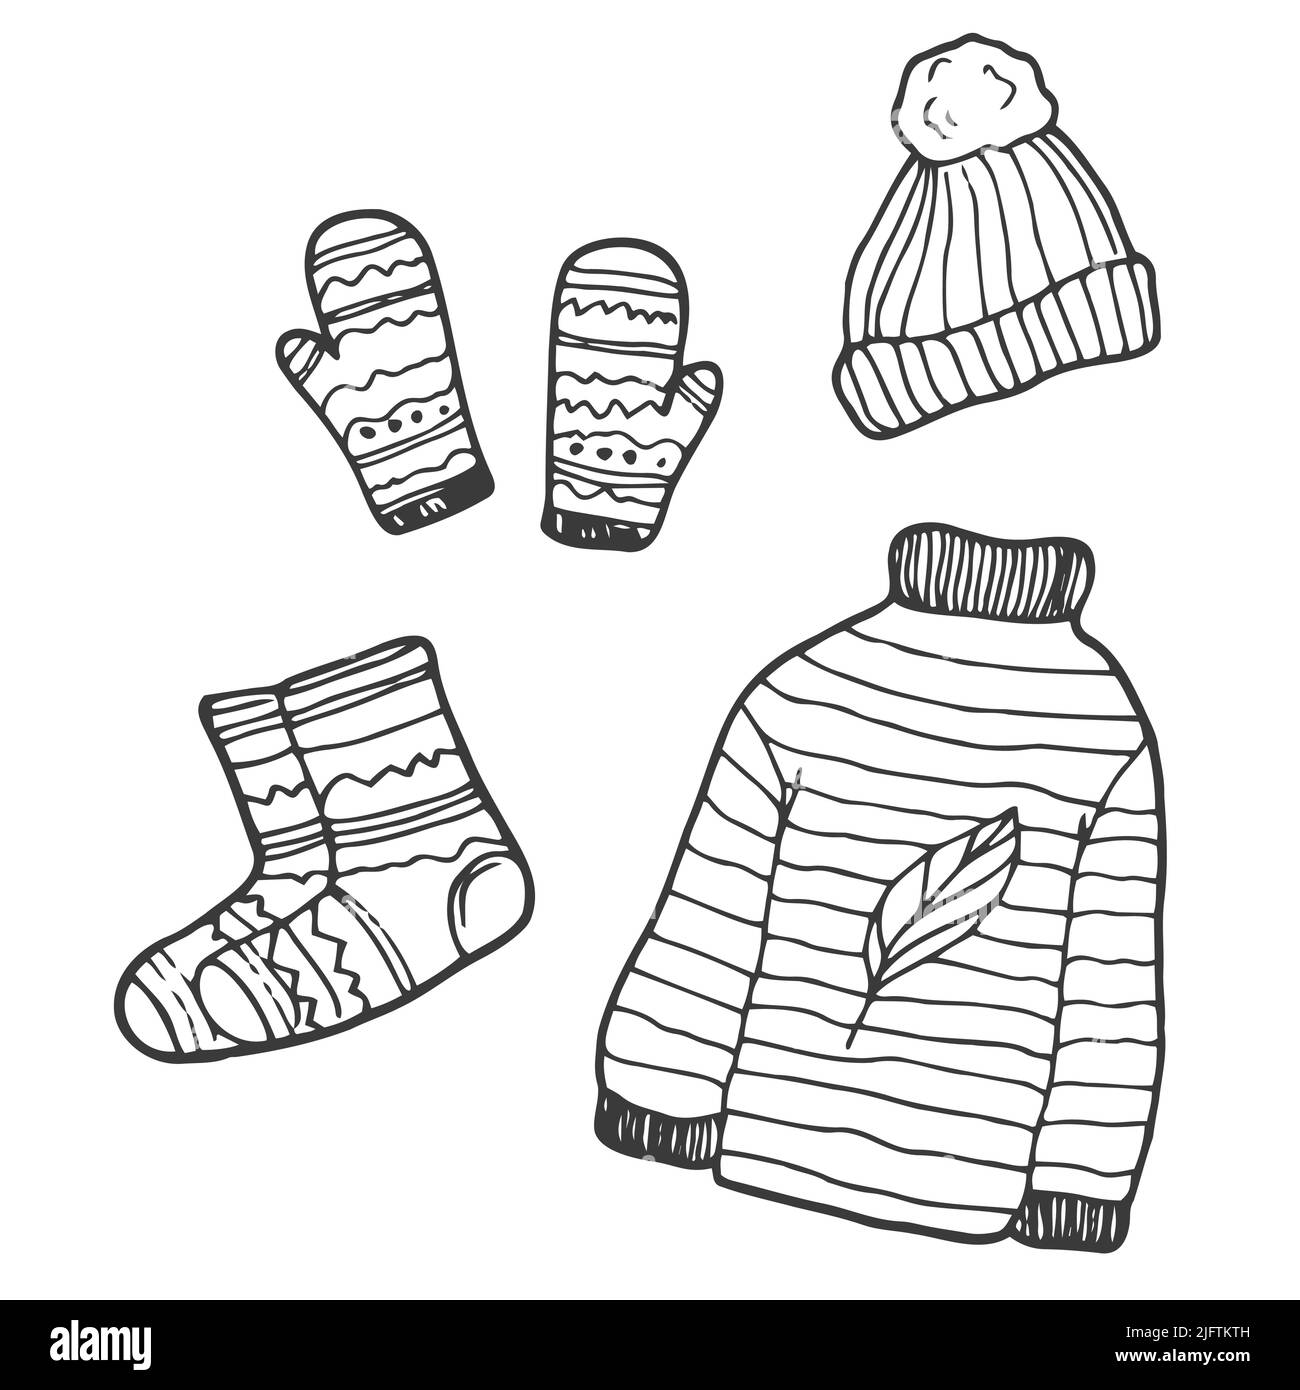 Vector hand-drawn set of knitted clothes. Hygge doodles - socks, mittens, woolen sweater, winter hat, knitting Stock Vector